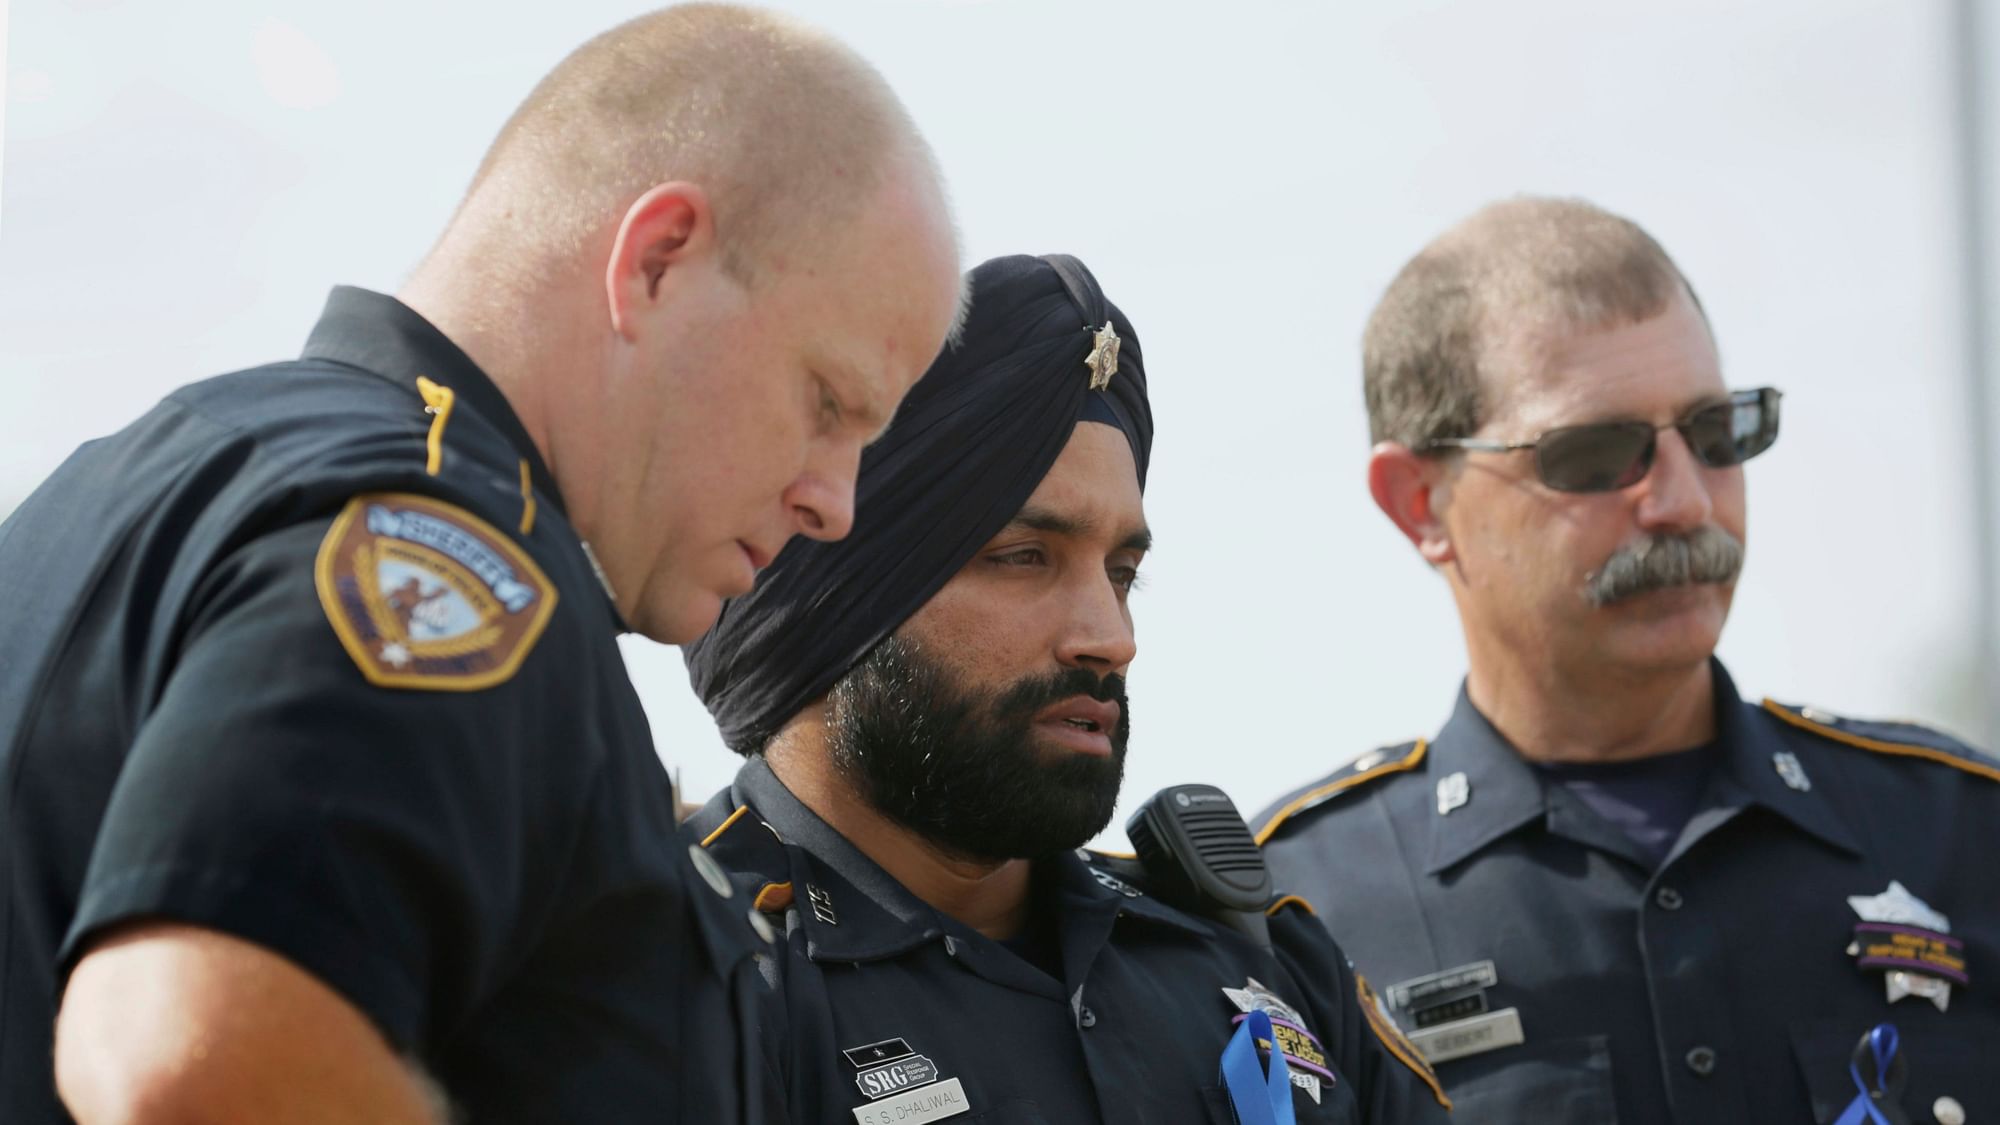 Dhaliwal was gunned down while conducting a mid-day traffic stop in northwest of Houston on Friday, 29 September